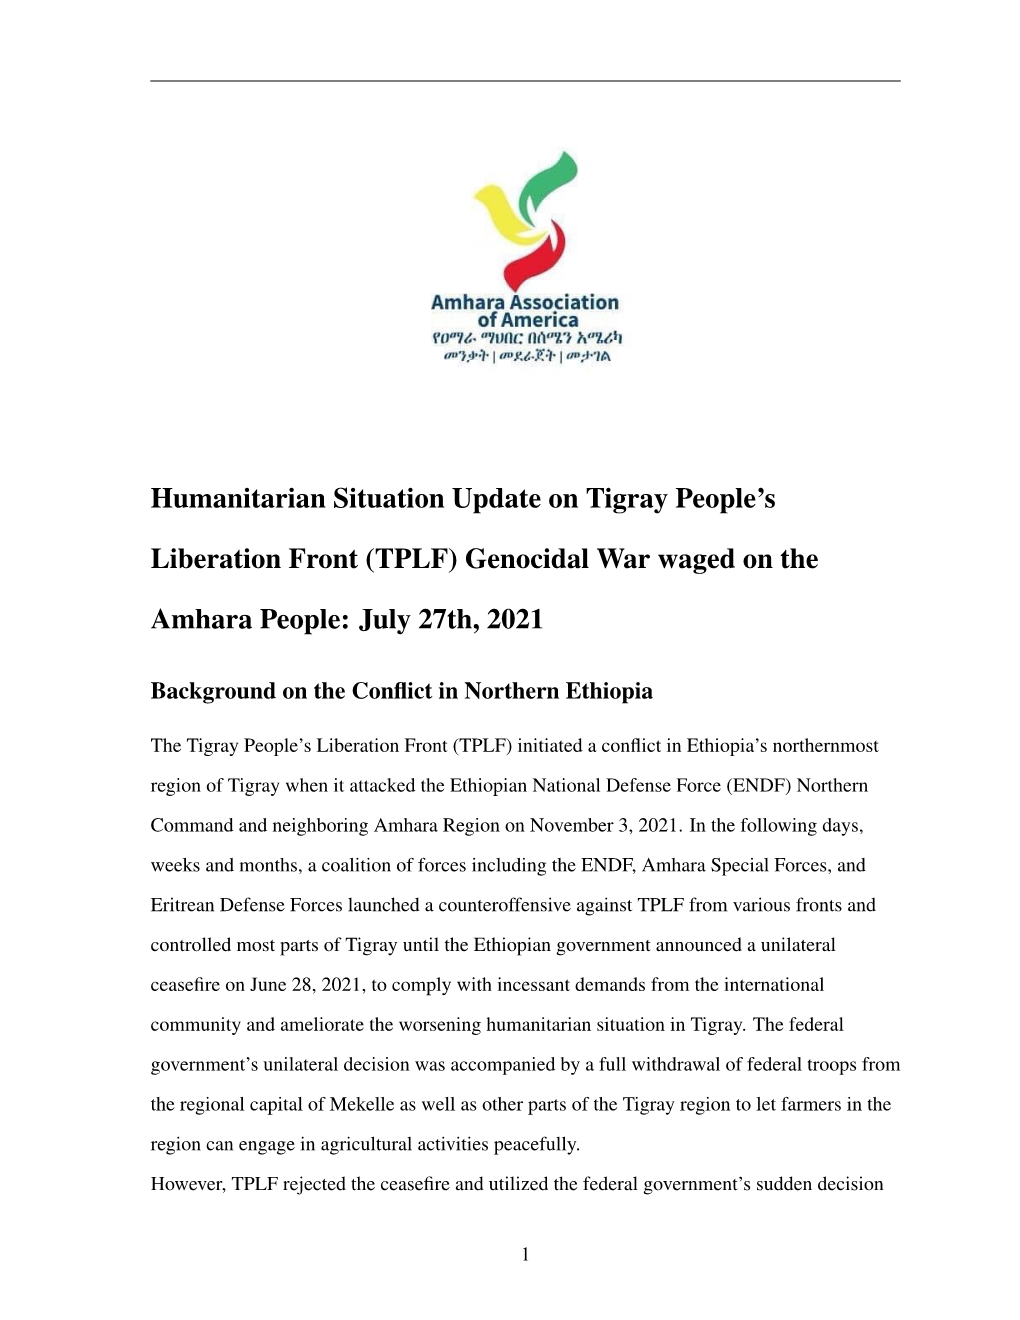 Humanitarian Situation Update on Tigray People's Liberation Front (TPLF) Genocidal War Waged on the Amhara People: July 27Th